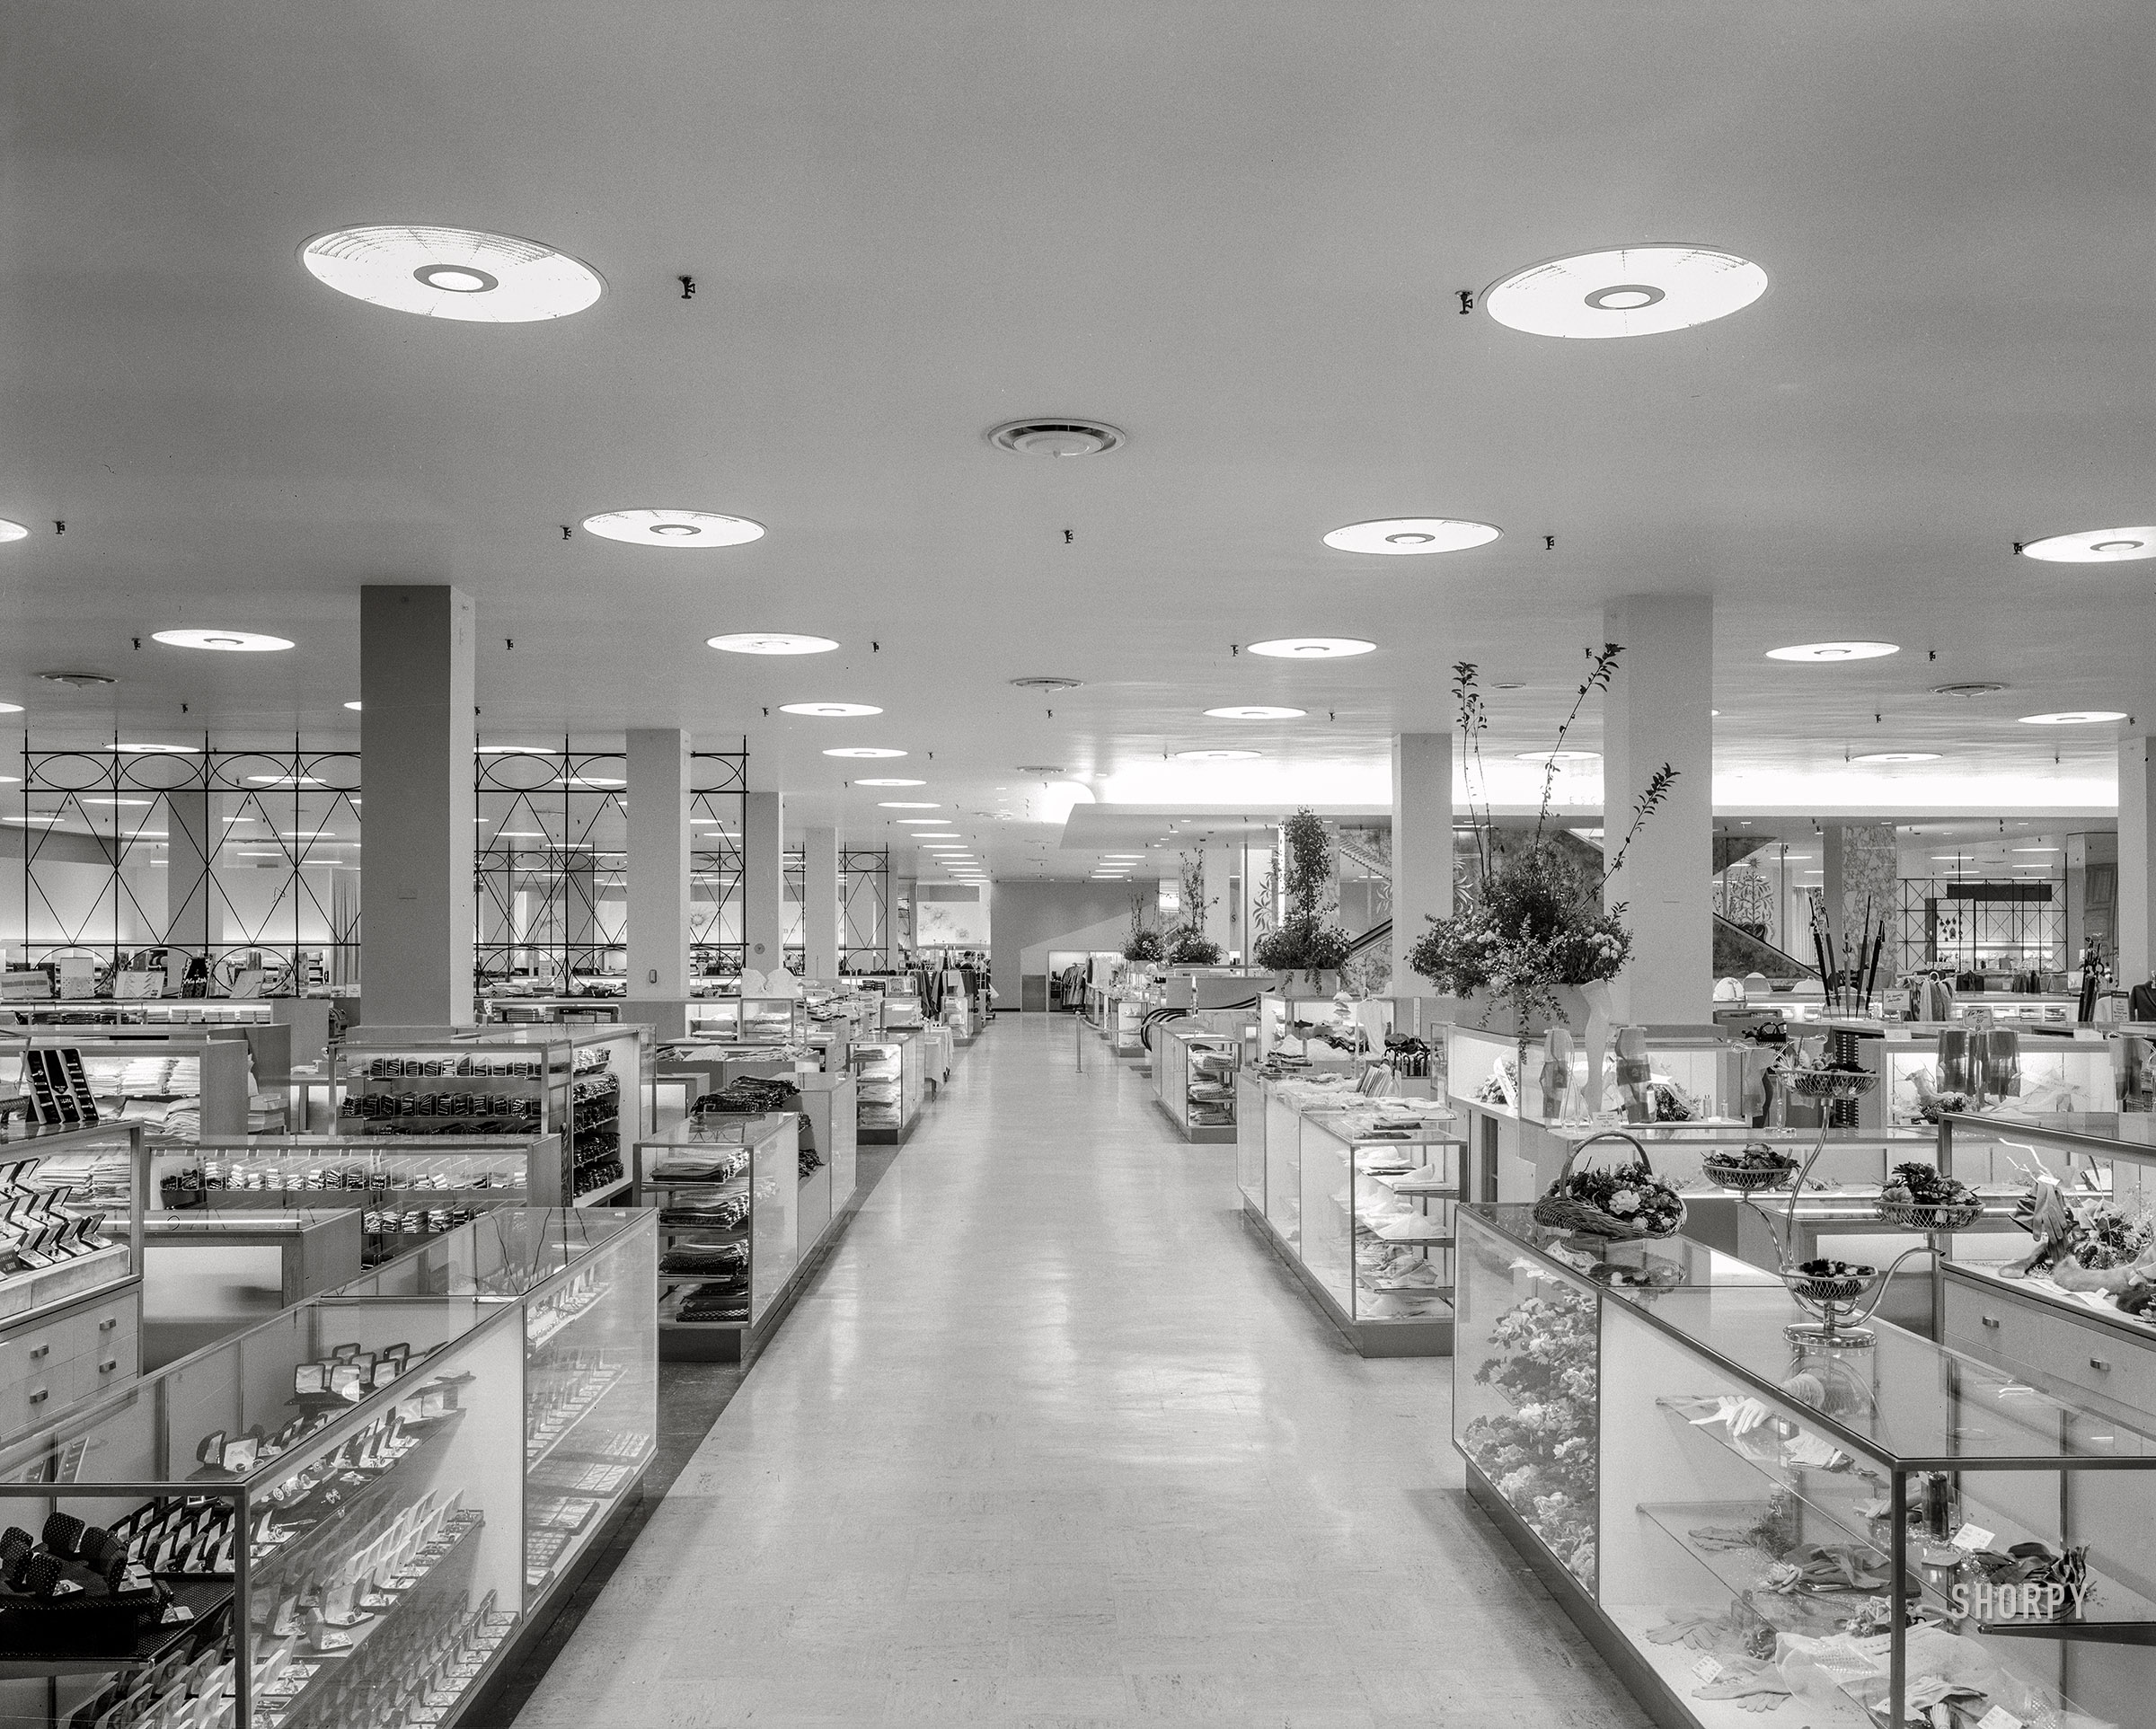 September 27, 1955. "Gimbel Brothers department store, Cross County Center, Yonkers, New York. Long shot to north. Raymond Loewy, client." Photo by Gottscho-Schleisner. View full size.